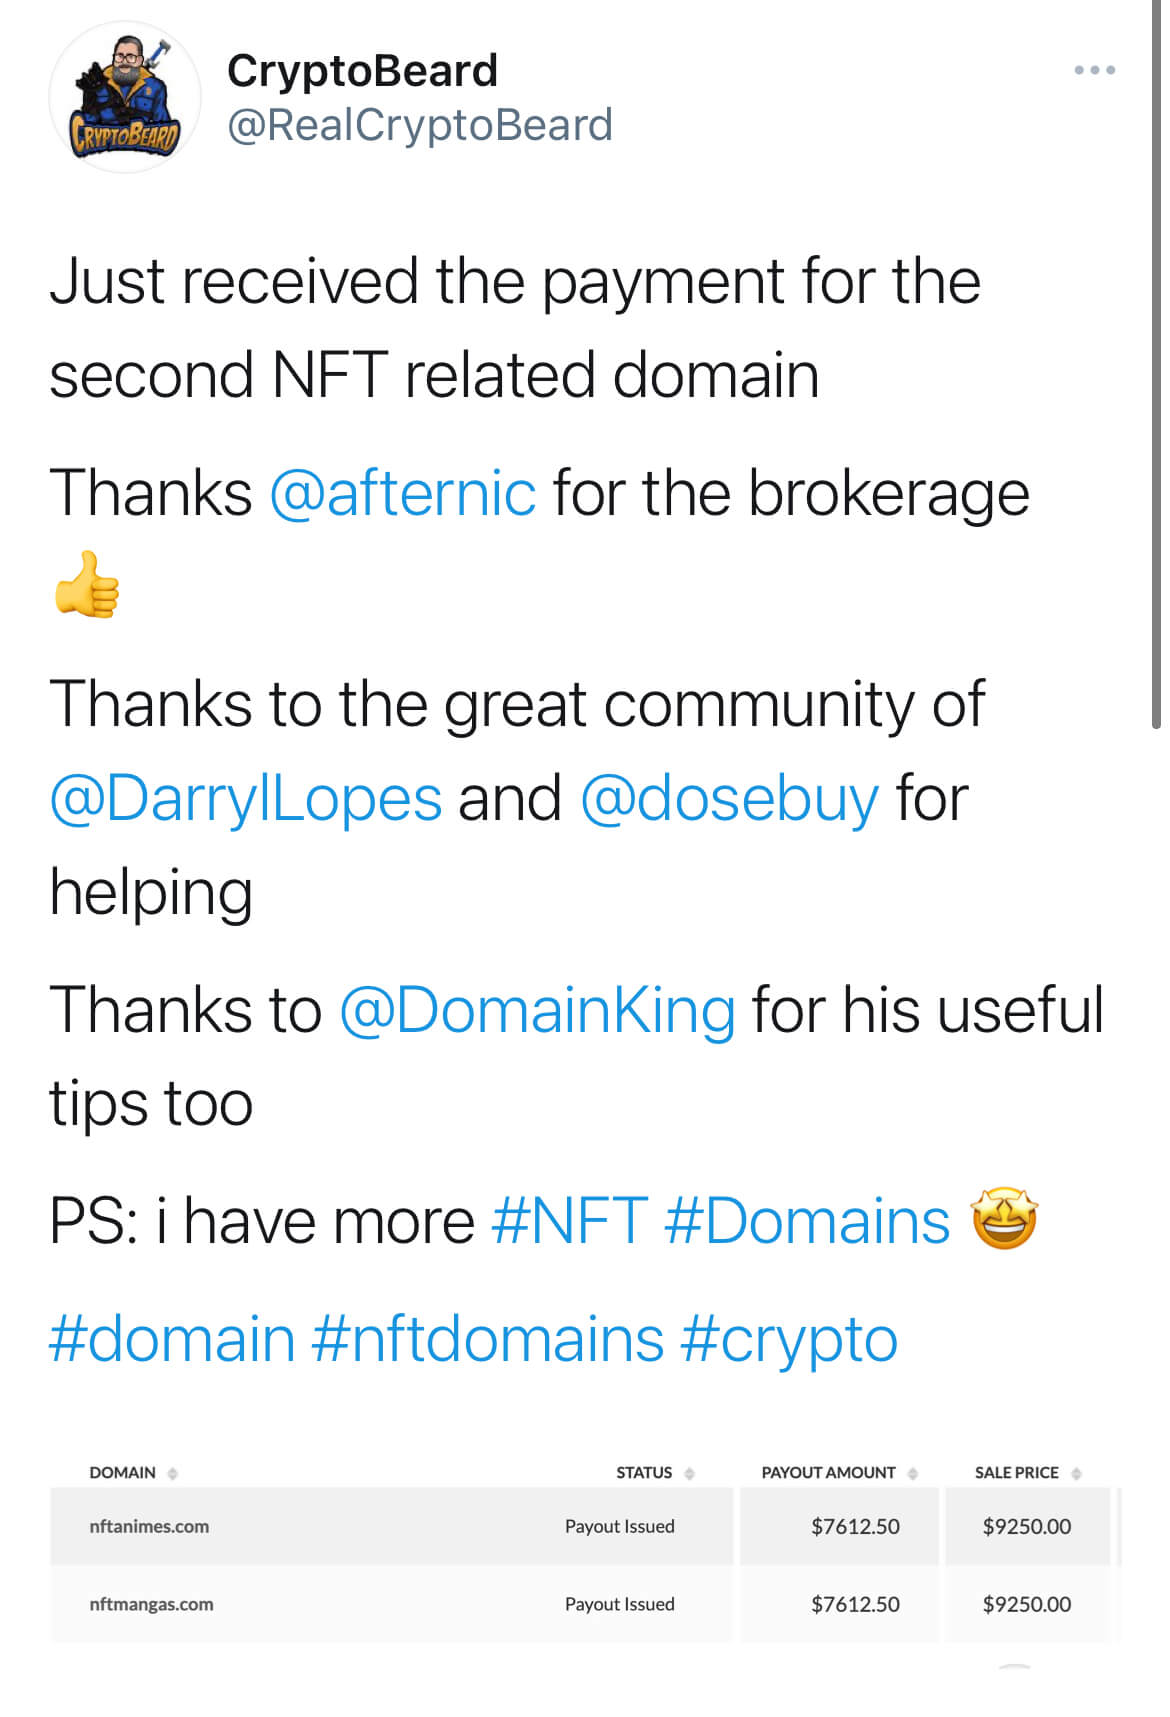 It’s not just NFT’s that are taking off, so are NFT domain names